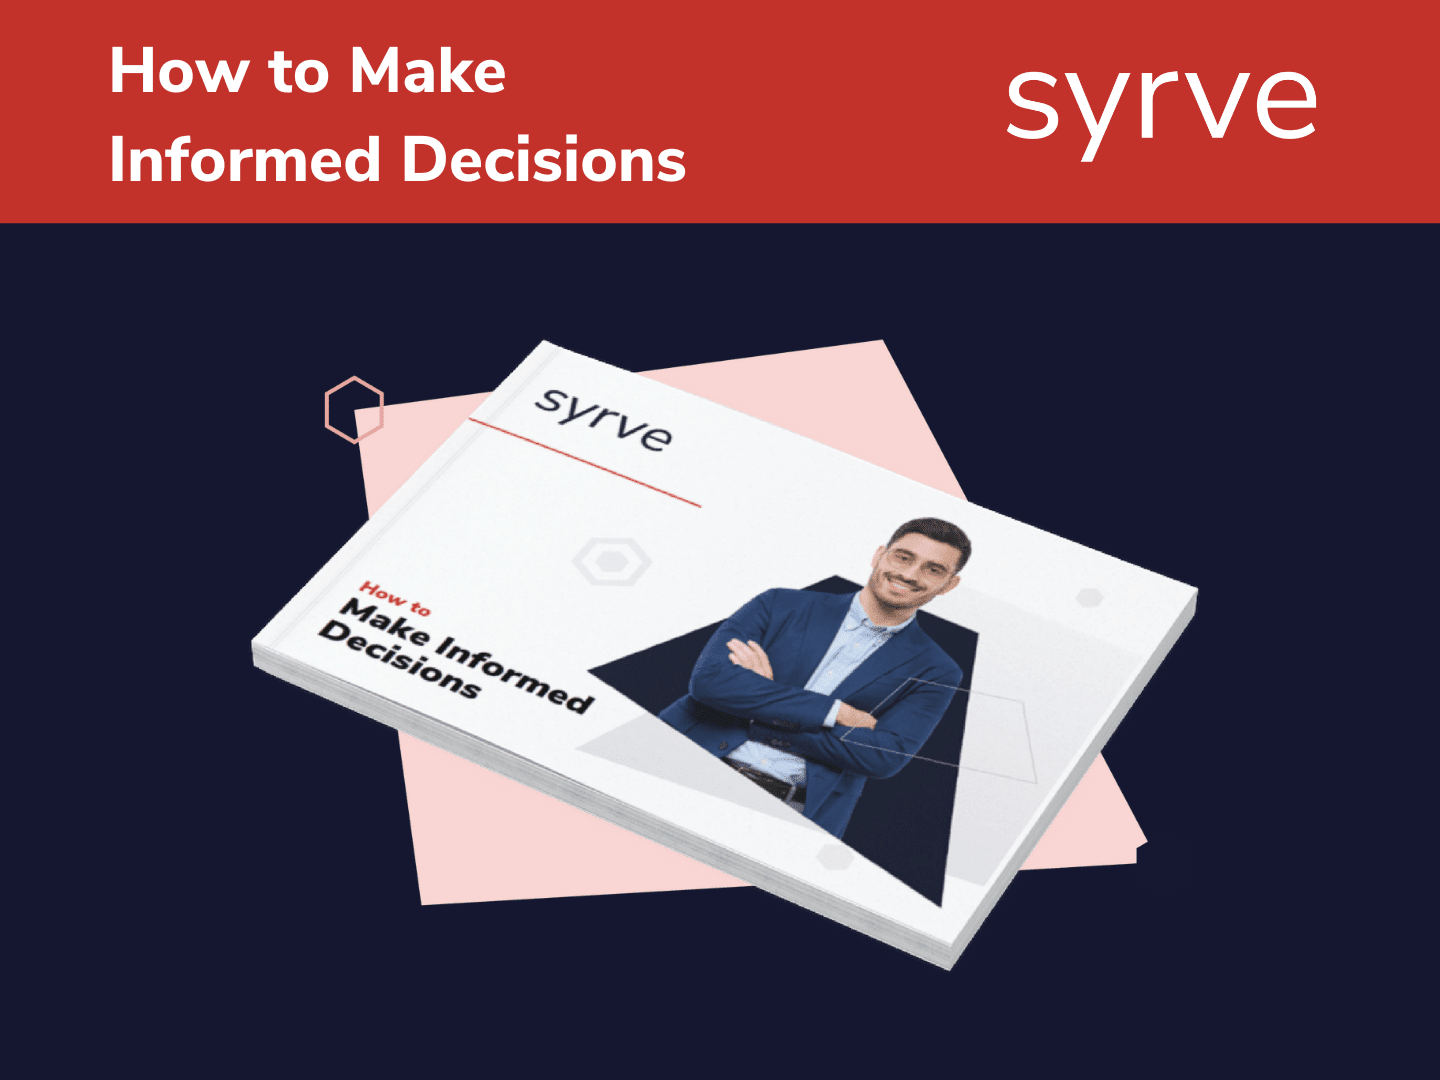 How to Make Informed Decisions